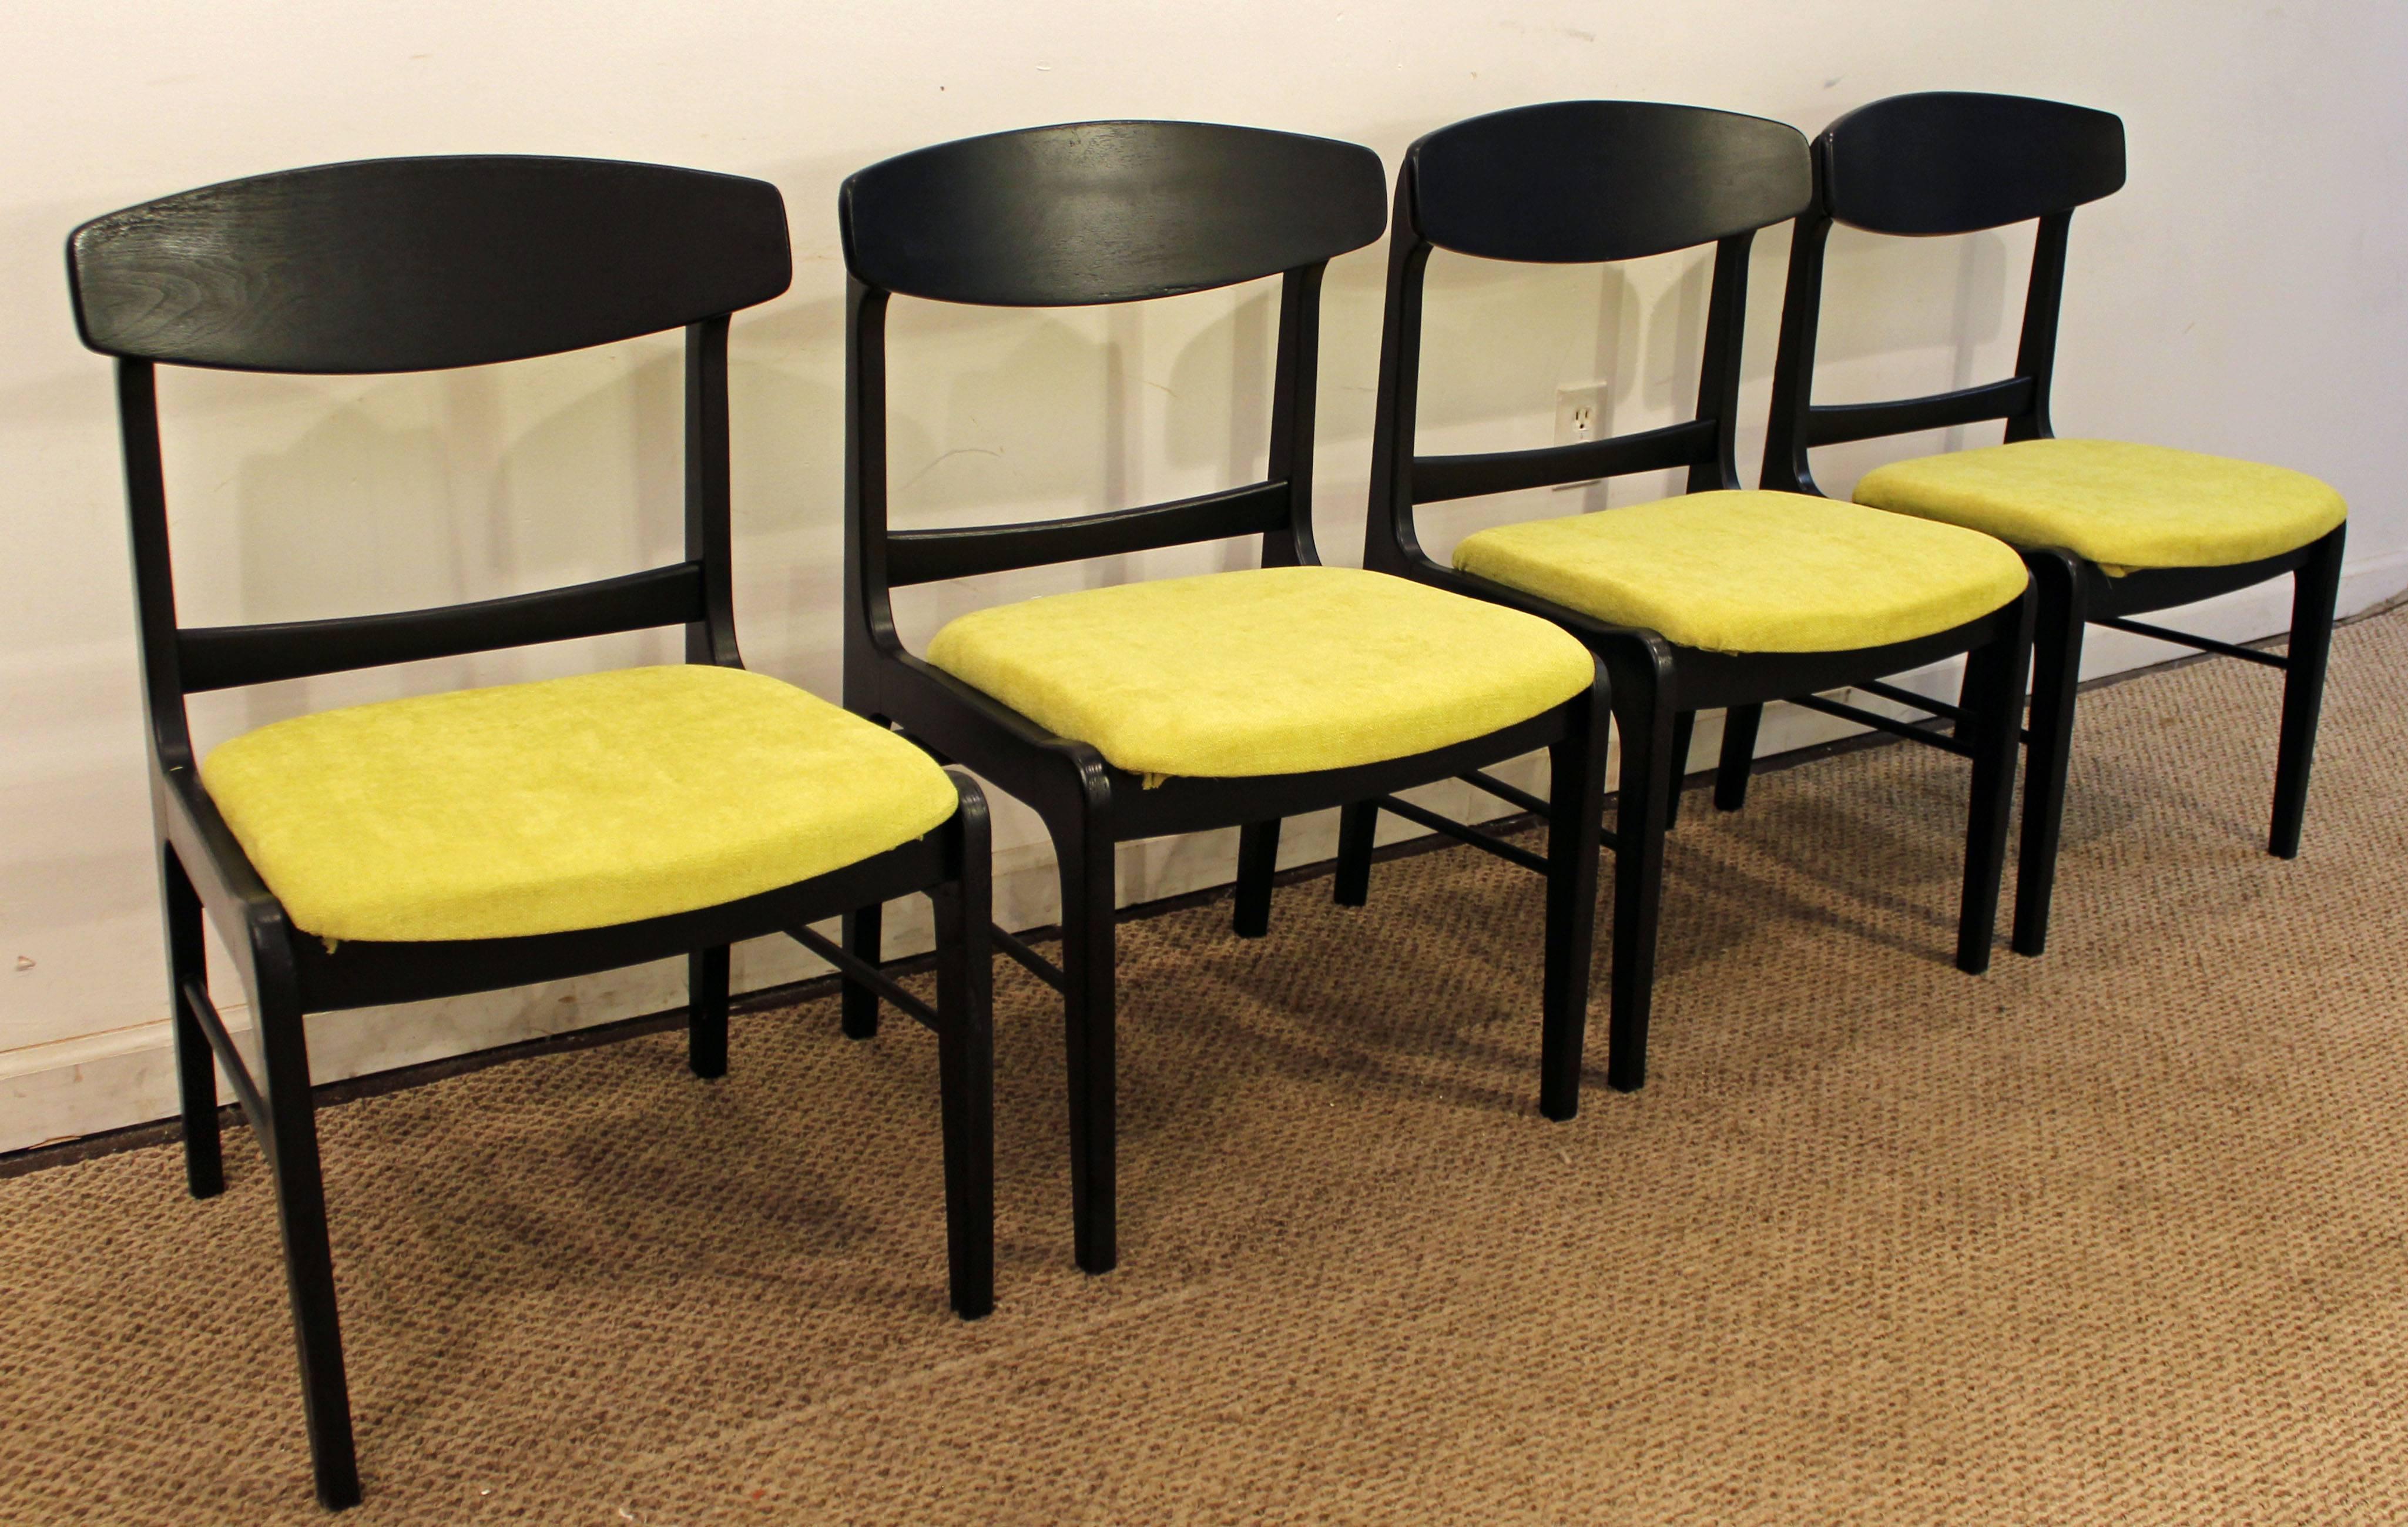 Offered is a very nice set of four Mid-Century Modern curved-back dining chairs. These chairs have been repainted black and reupholstered with new 'Citron' fabric.

Dimensions:
21